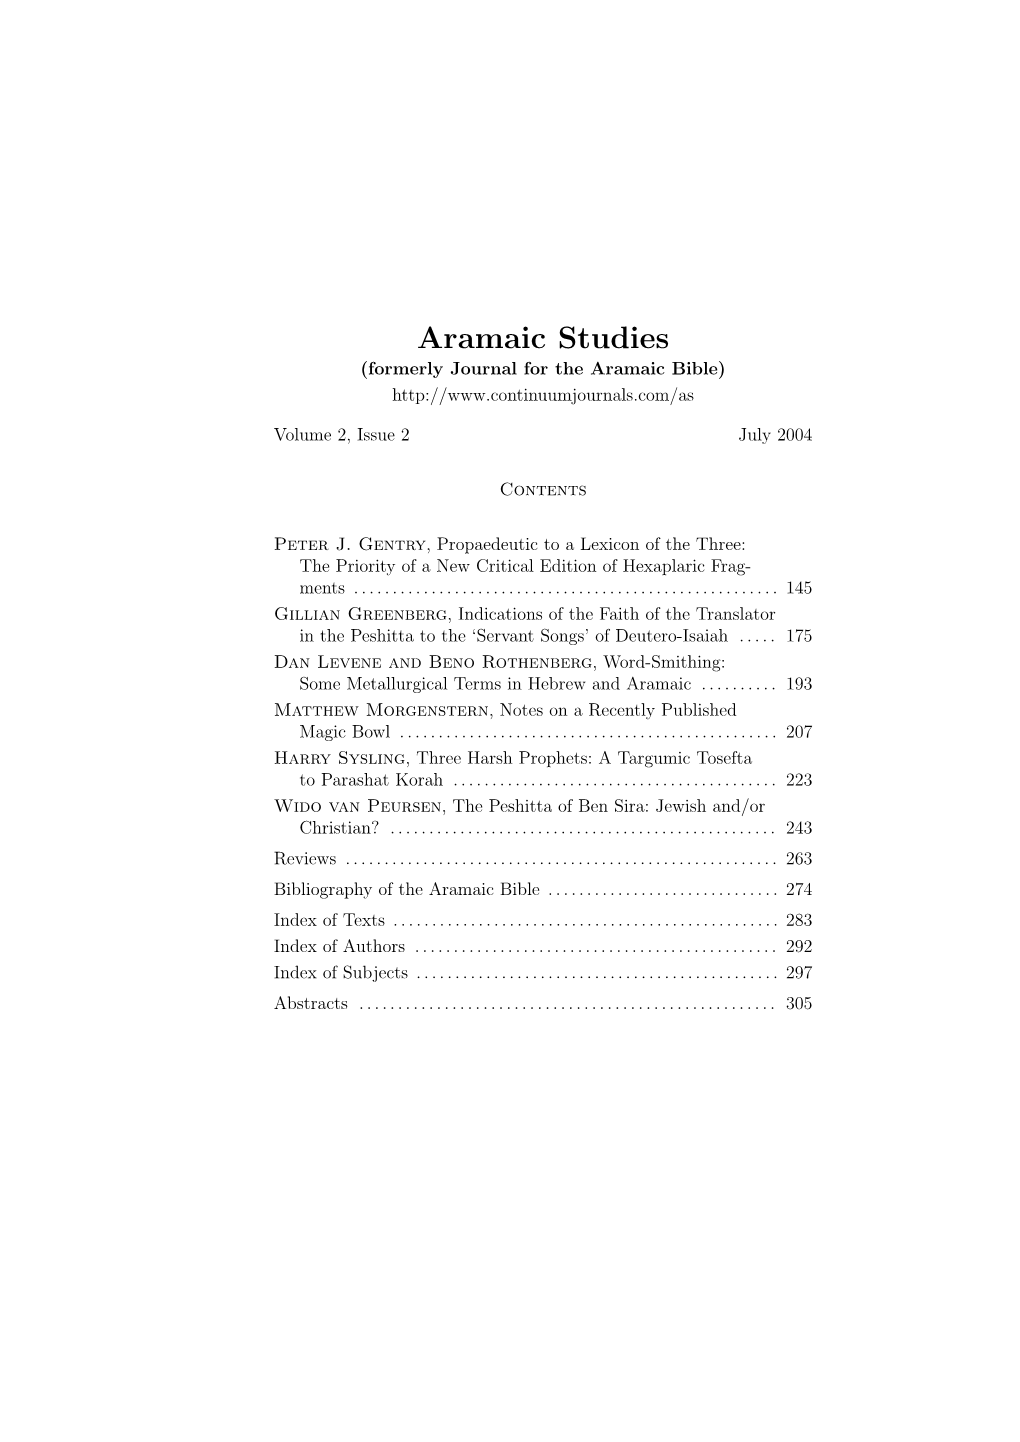 Aramaic Studies (Formerly Journal for the Aramaic Bible)